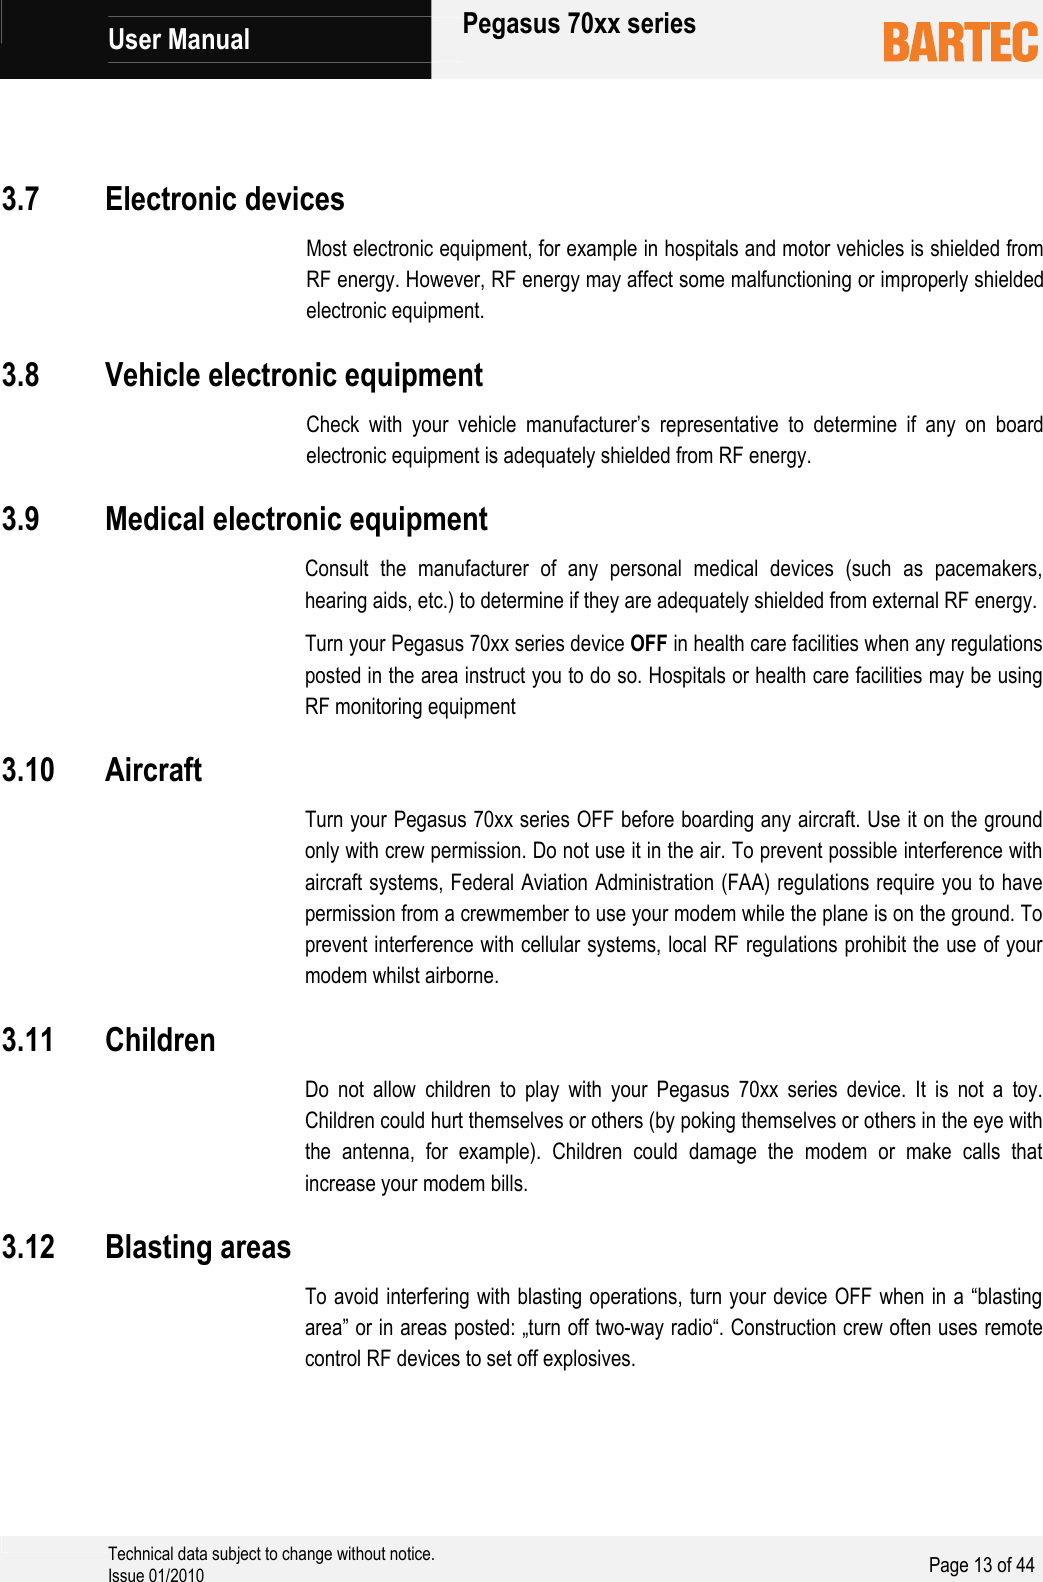             User Manual   Pegasus 70xx series     Technical data subject to change without notice. Issue 01/2010  Page 13 of 44     Most electronic equipment, for example in hospitals and motor vehicles is shielded from RF energy. However, RF energy may affect some malfunctioning or improperly shielded electronic equipment.  Check with your vehicle manufacturer’s representative to determine if any on board electronic equipment is adequately shielded from RF energy.  Consult the manufacturer of any personal medical devices (such as pacemakers, hearing aids, etc.) to determine if they are adequately shielded from external RF energy. Turn your Pegasus 70xx series device OFF in health care facilities when any regulations posted in the area instruct you to do so. Hospitals or health care facilities may be using RF monitoring equipment  Turn your Pegasus 70xx series OFF before boarding any aircraft. Use it on the ground only with crew permission. Do not use it in the air. To prevent possible interference with aircraft systems, Federal Aviation Administration (FAA) regulations require you to have permission from a crewmember to use your modem while the plane is on the ground. To prevent interference with cellular systems, local RF regulations prohibit the use of your modem whilst airborne.  Do not allow children to play with your Pegasus 70xx series device. It is not a toy. Children could hurt themselves or others (by poking themselves or others in the eye with the antenna, for example). Children could damage the modem or make calls that increase your modem bills.  To avoid interfering with blasting operations, turn your device OFF when in a “blasting area” or in areas posted: „turn off two-way radio“. Construction crew often uses remote control RF devices to set off explosives.  3.7 Electronic devices3.8 Vehicle electronic equipment3.9 Medical electronic equipment3.10 Aircraft3.11 Children3.12 Blasting areas